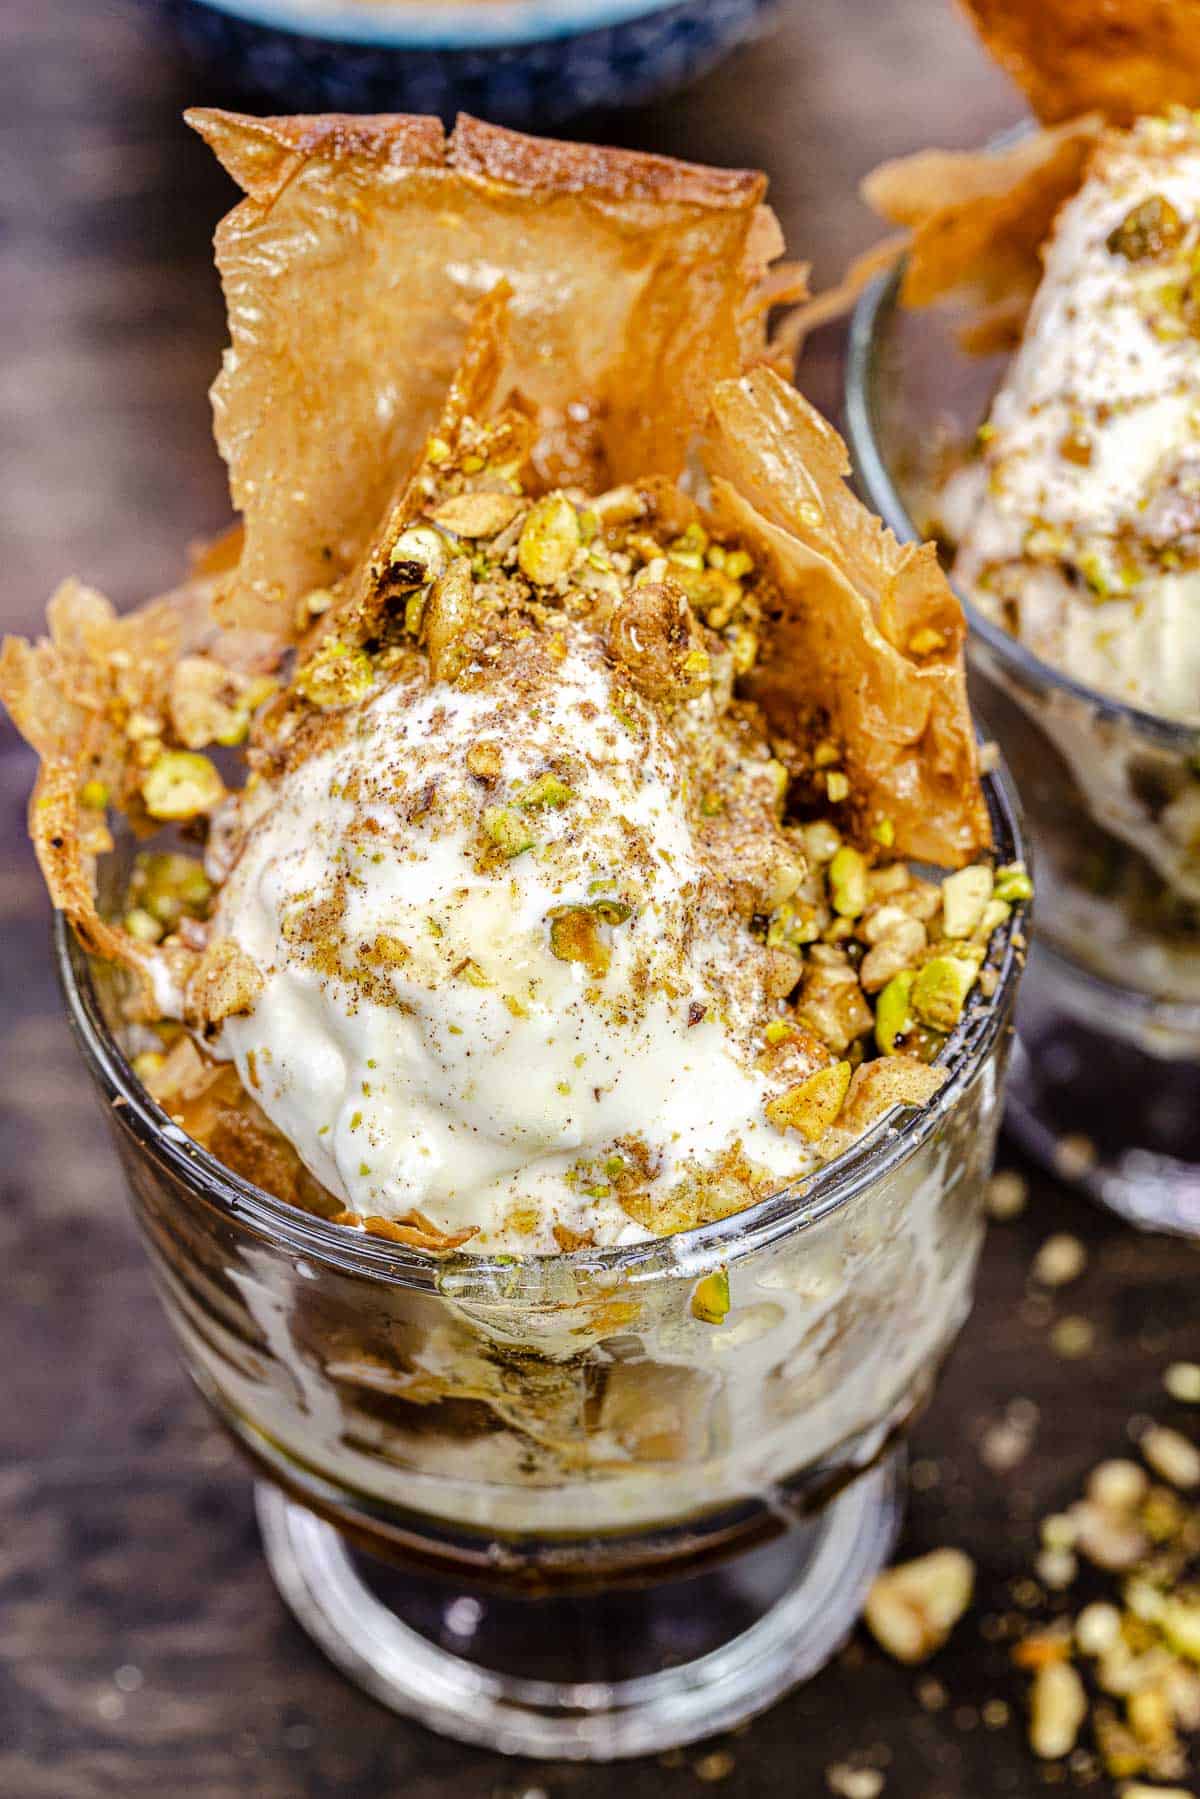 5 Stylish Ice Cream Bowls To Make Dessert Time A Delight